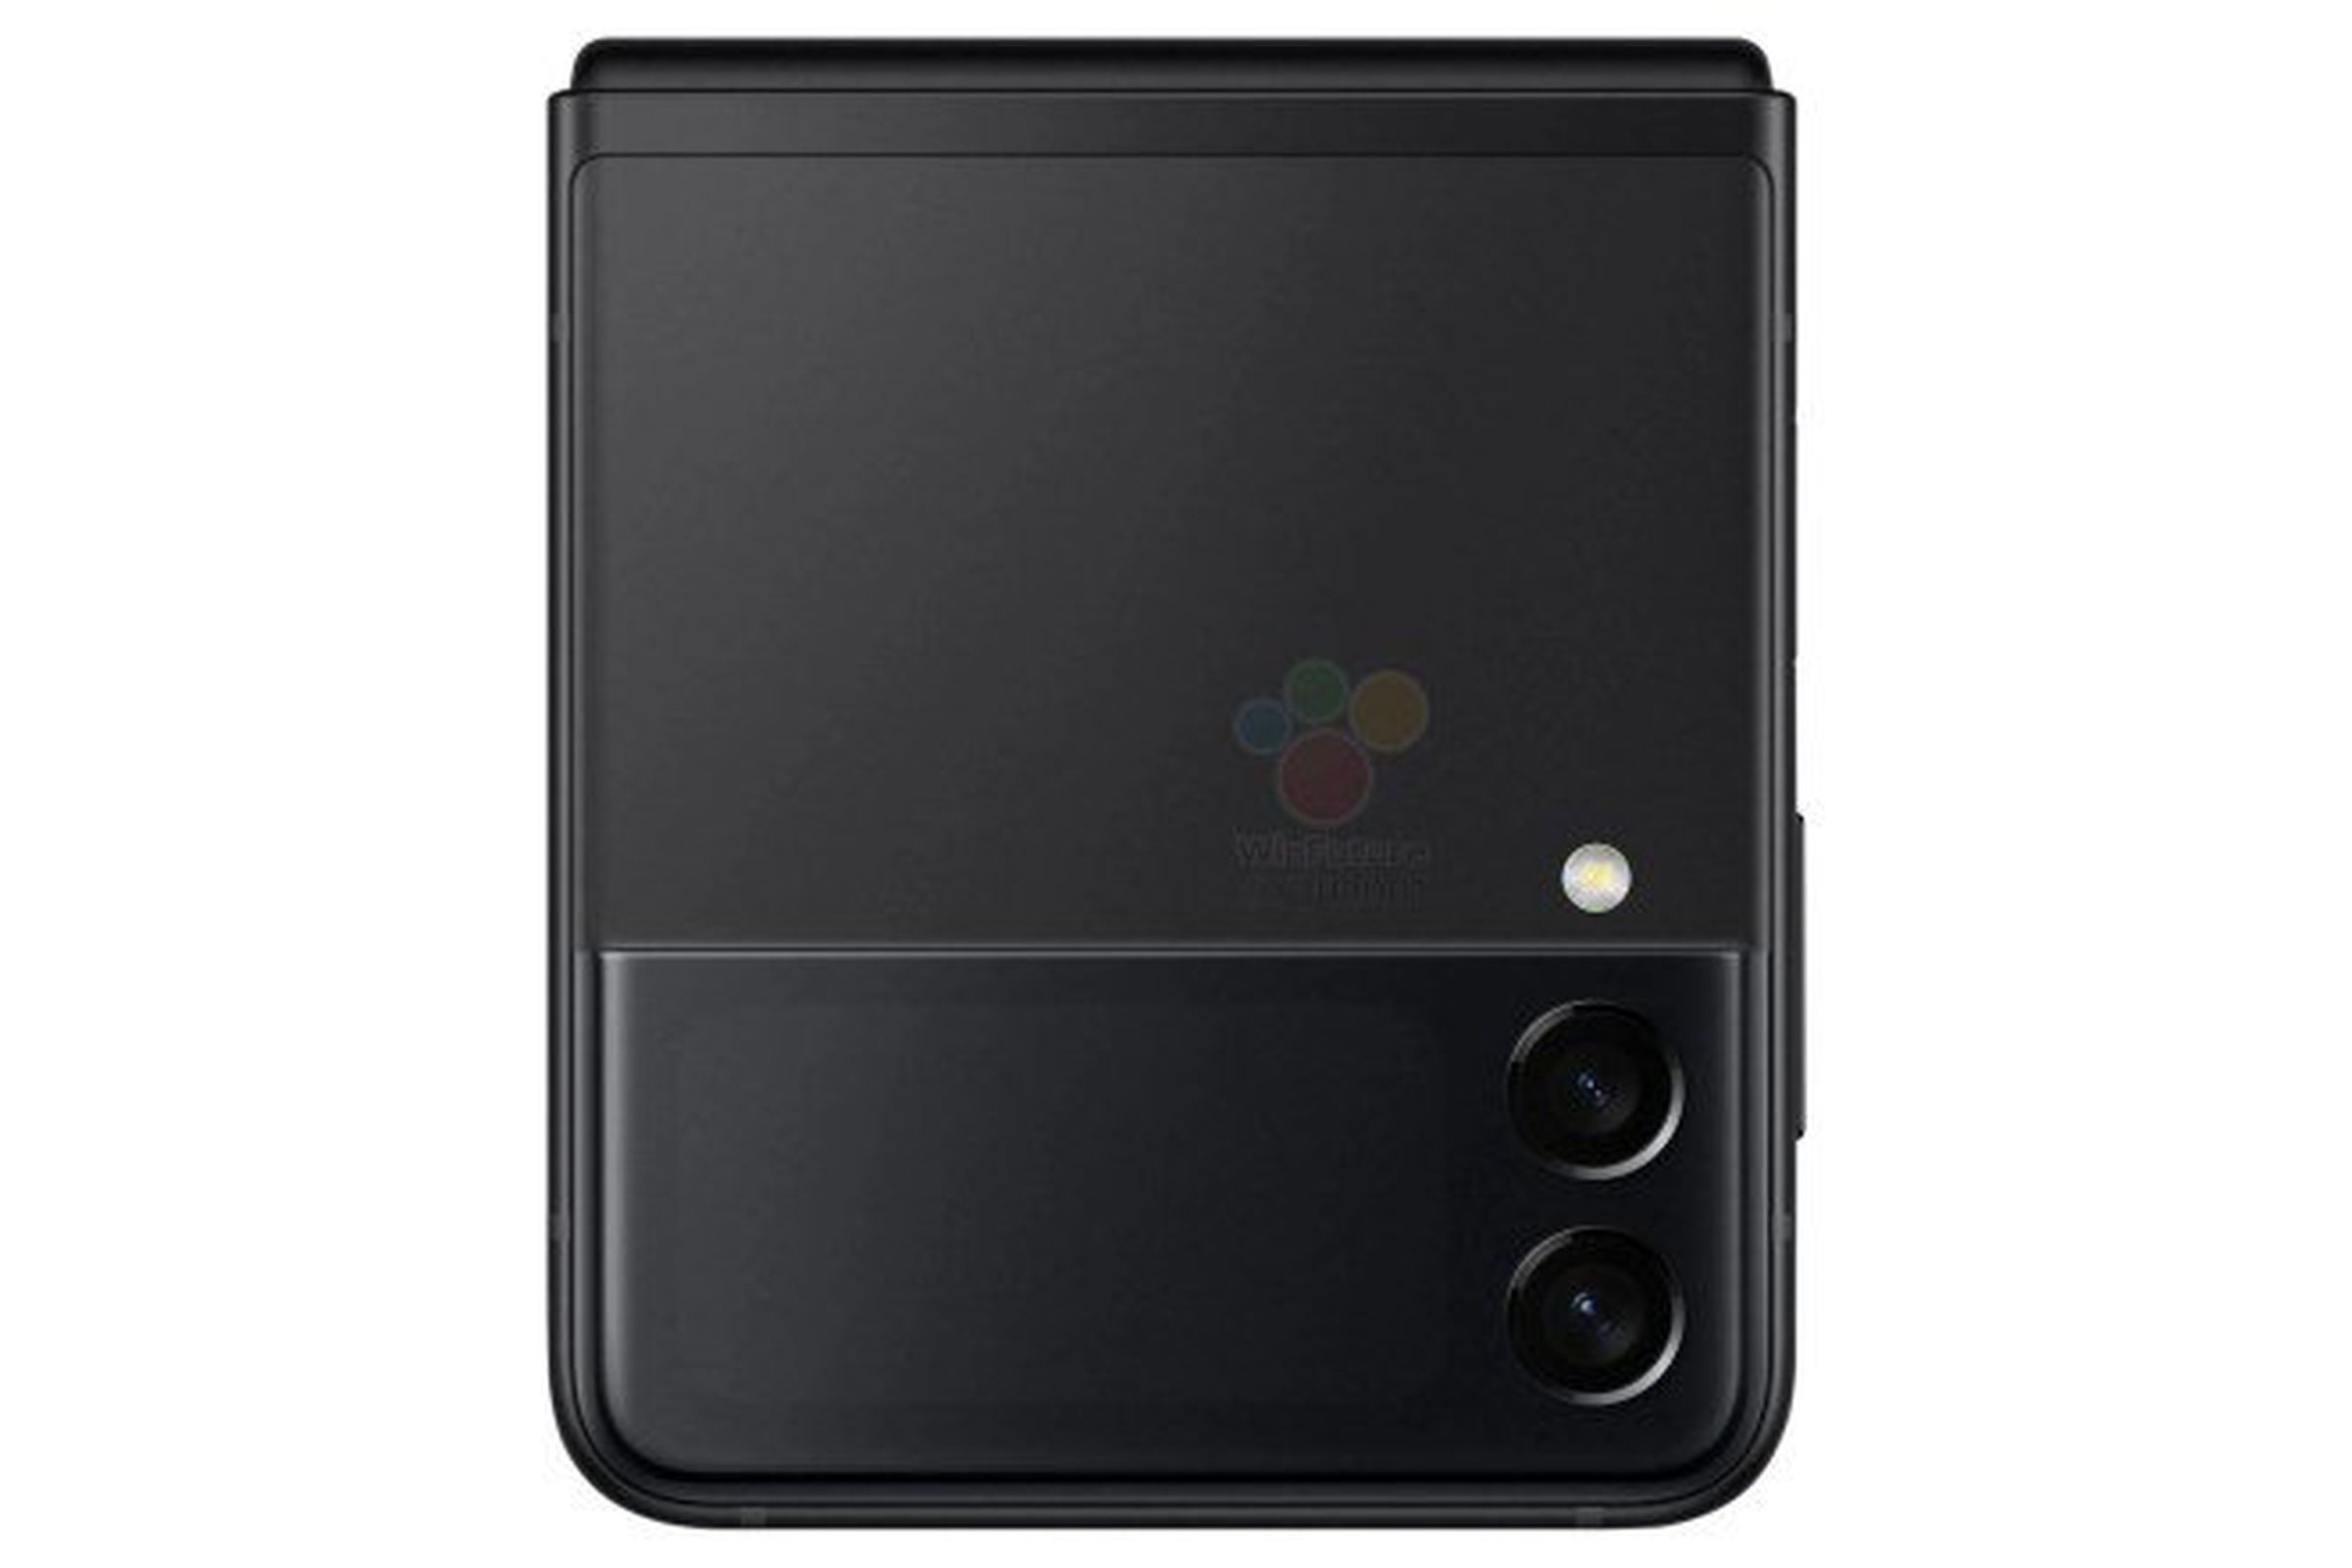 The screen and cameras on the Z Flip’s lid.